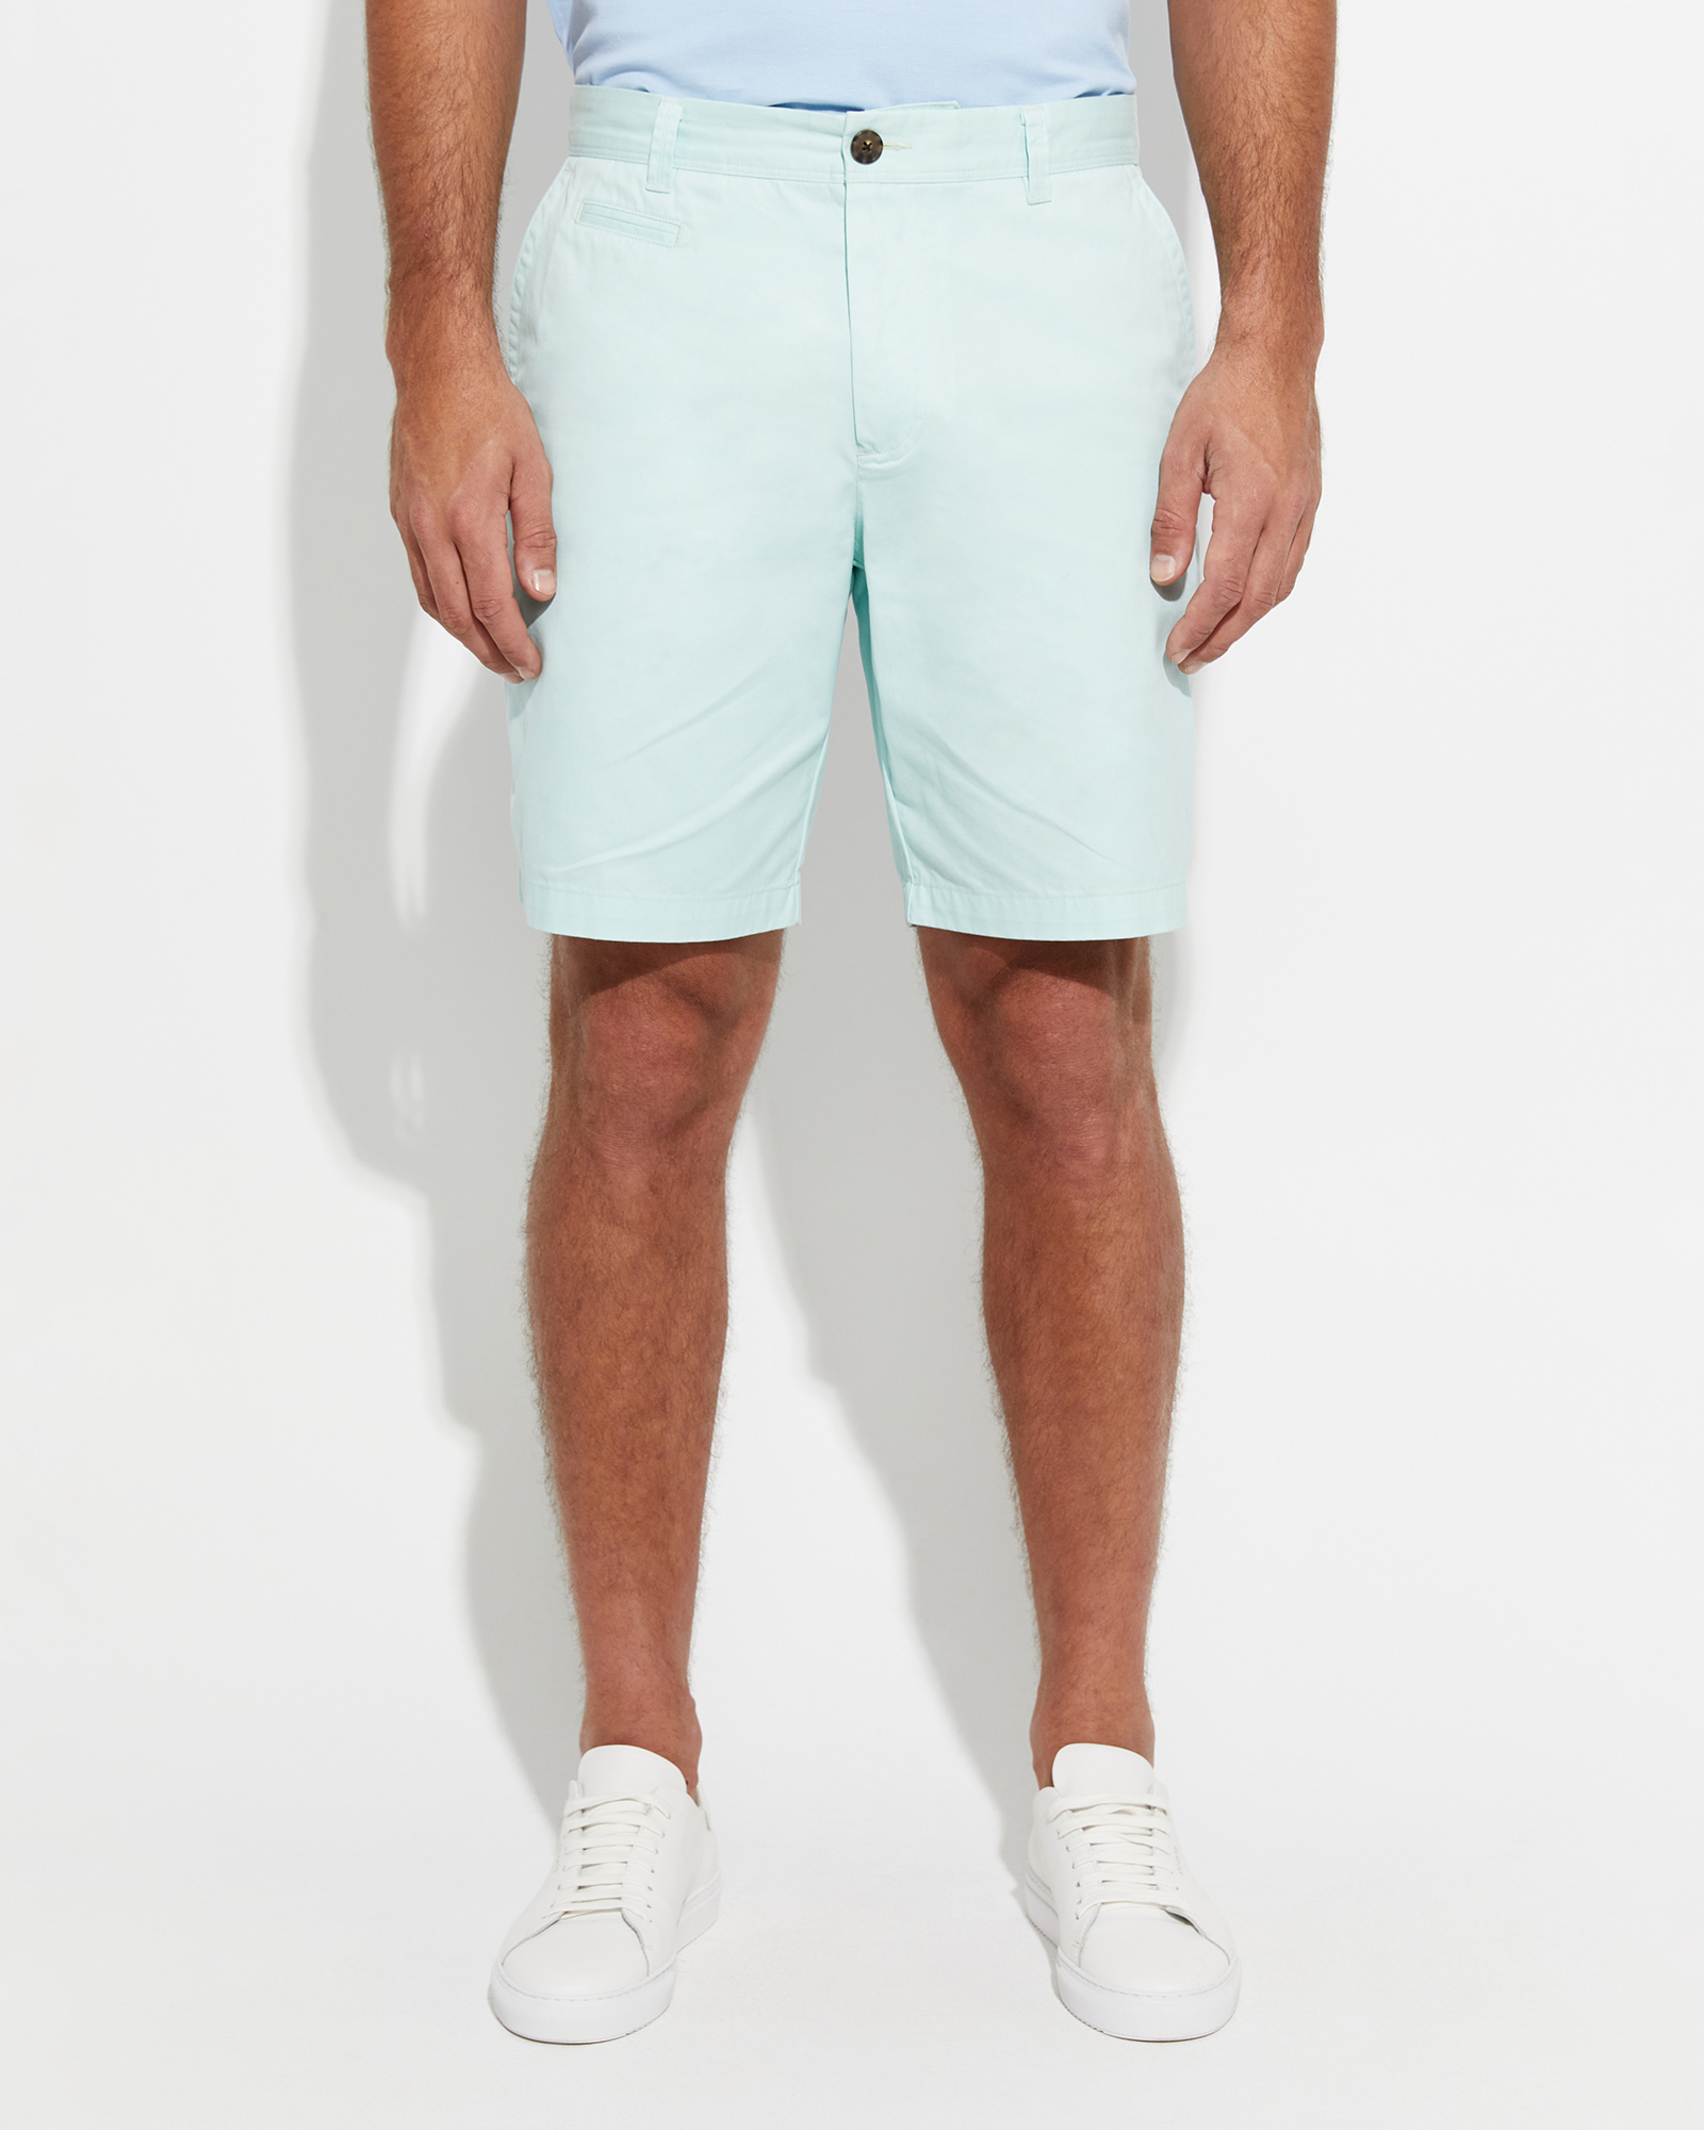 Classic Chino Short in MINT